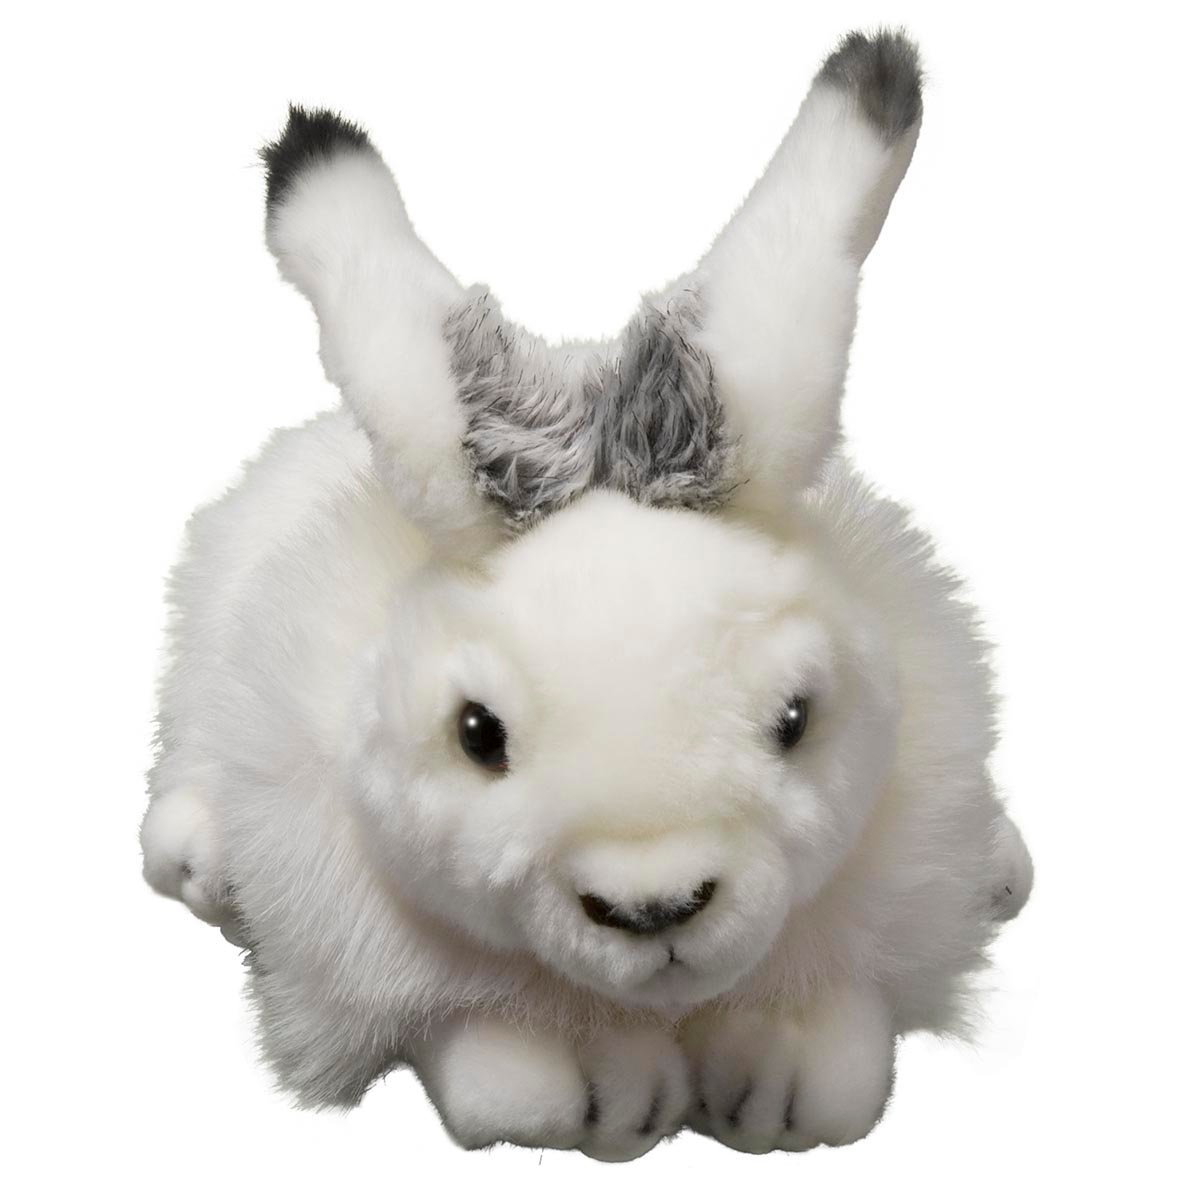 Adopt an Arctic Hare | Symbolic Adoptions from WWF